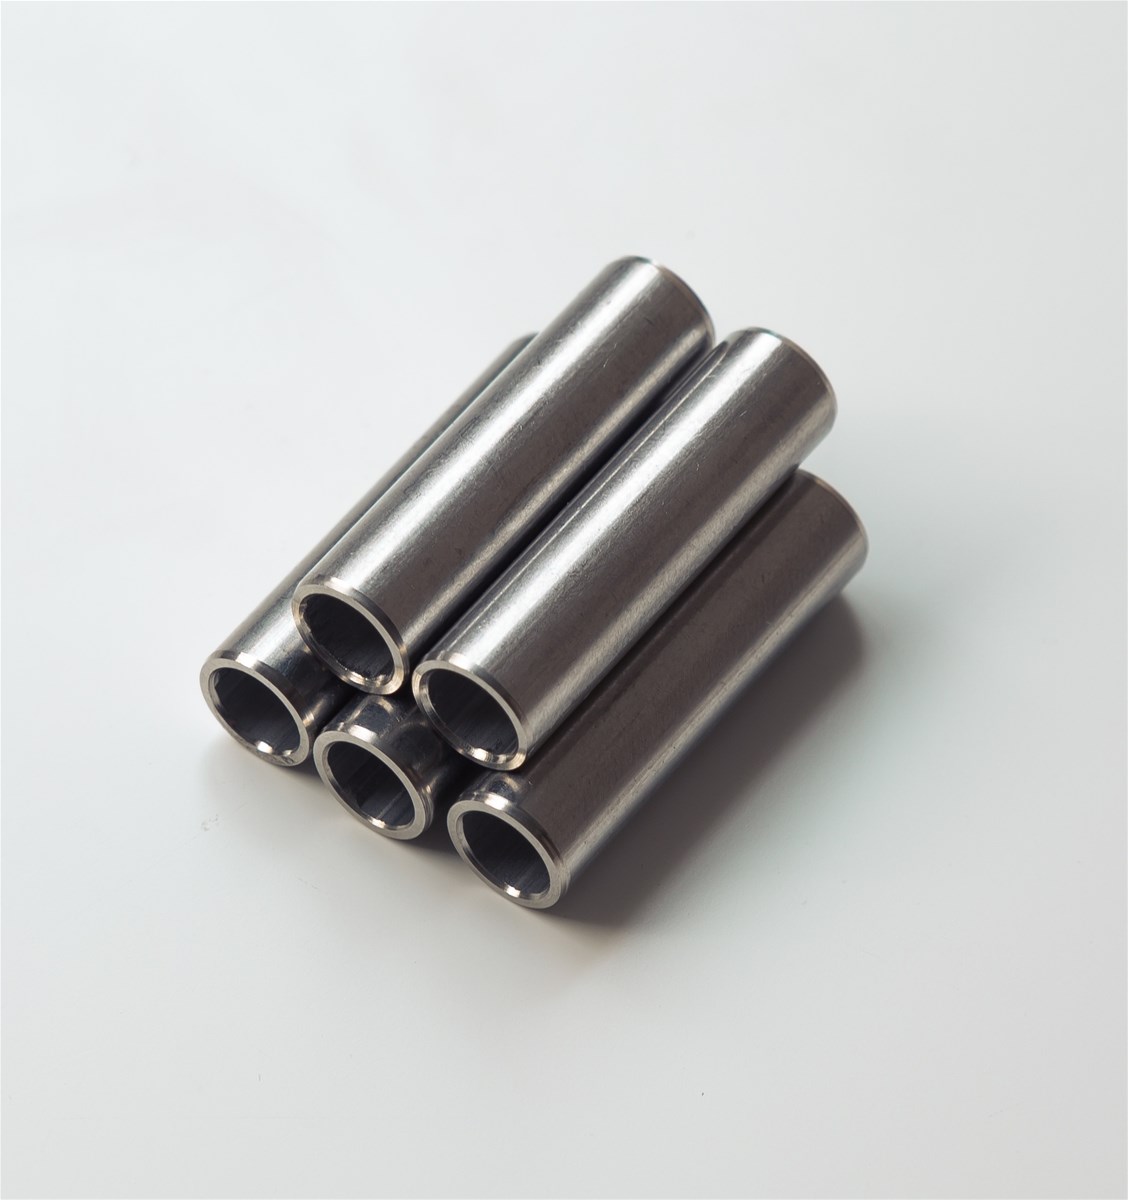 Stainless Steel Welded Tubes for Automotive Engine Water Tubing